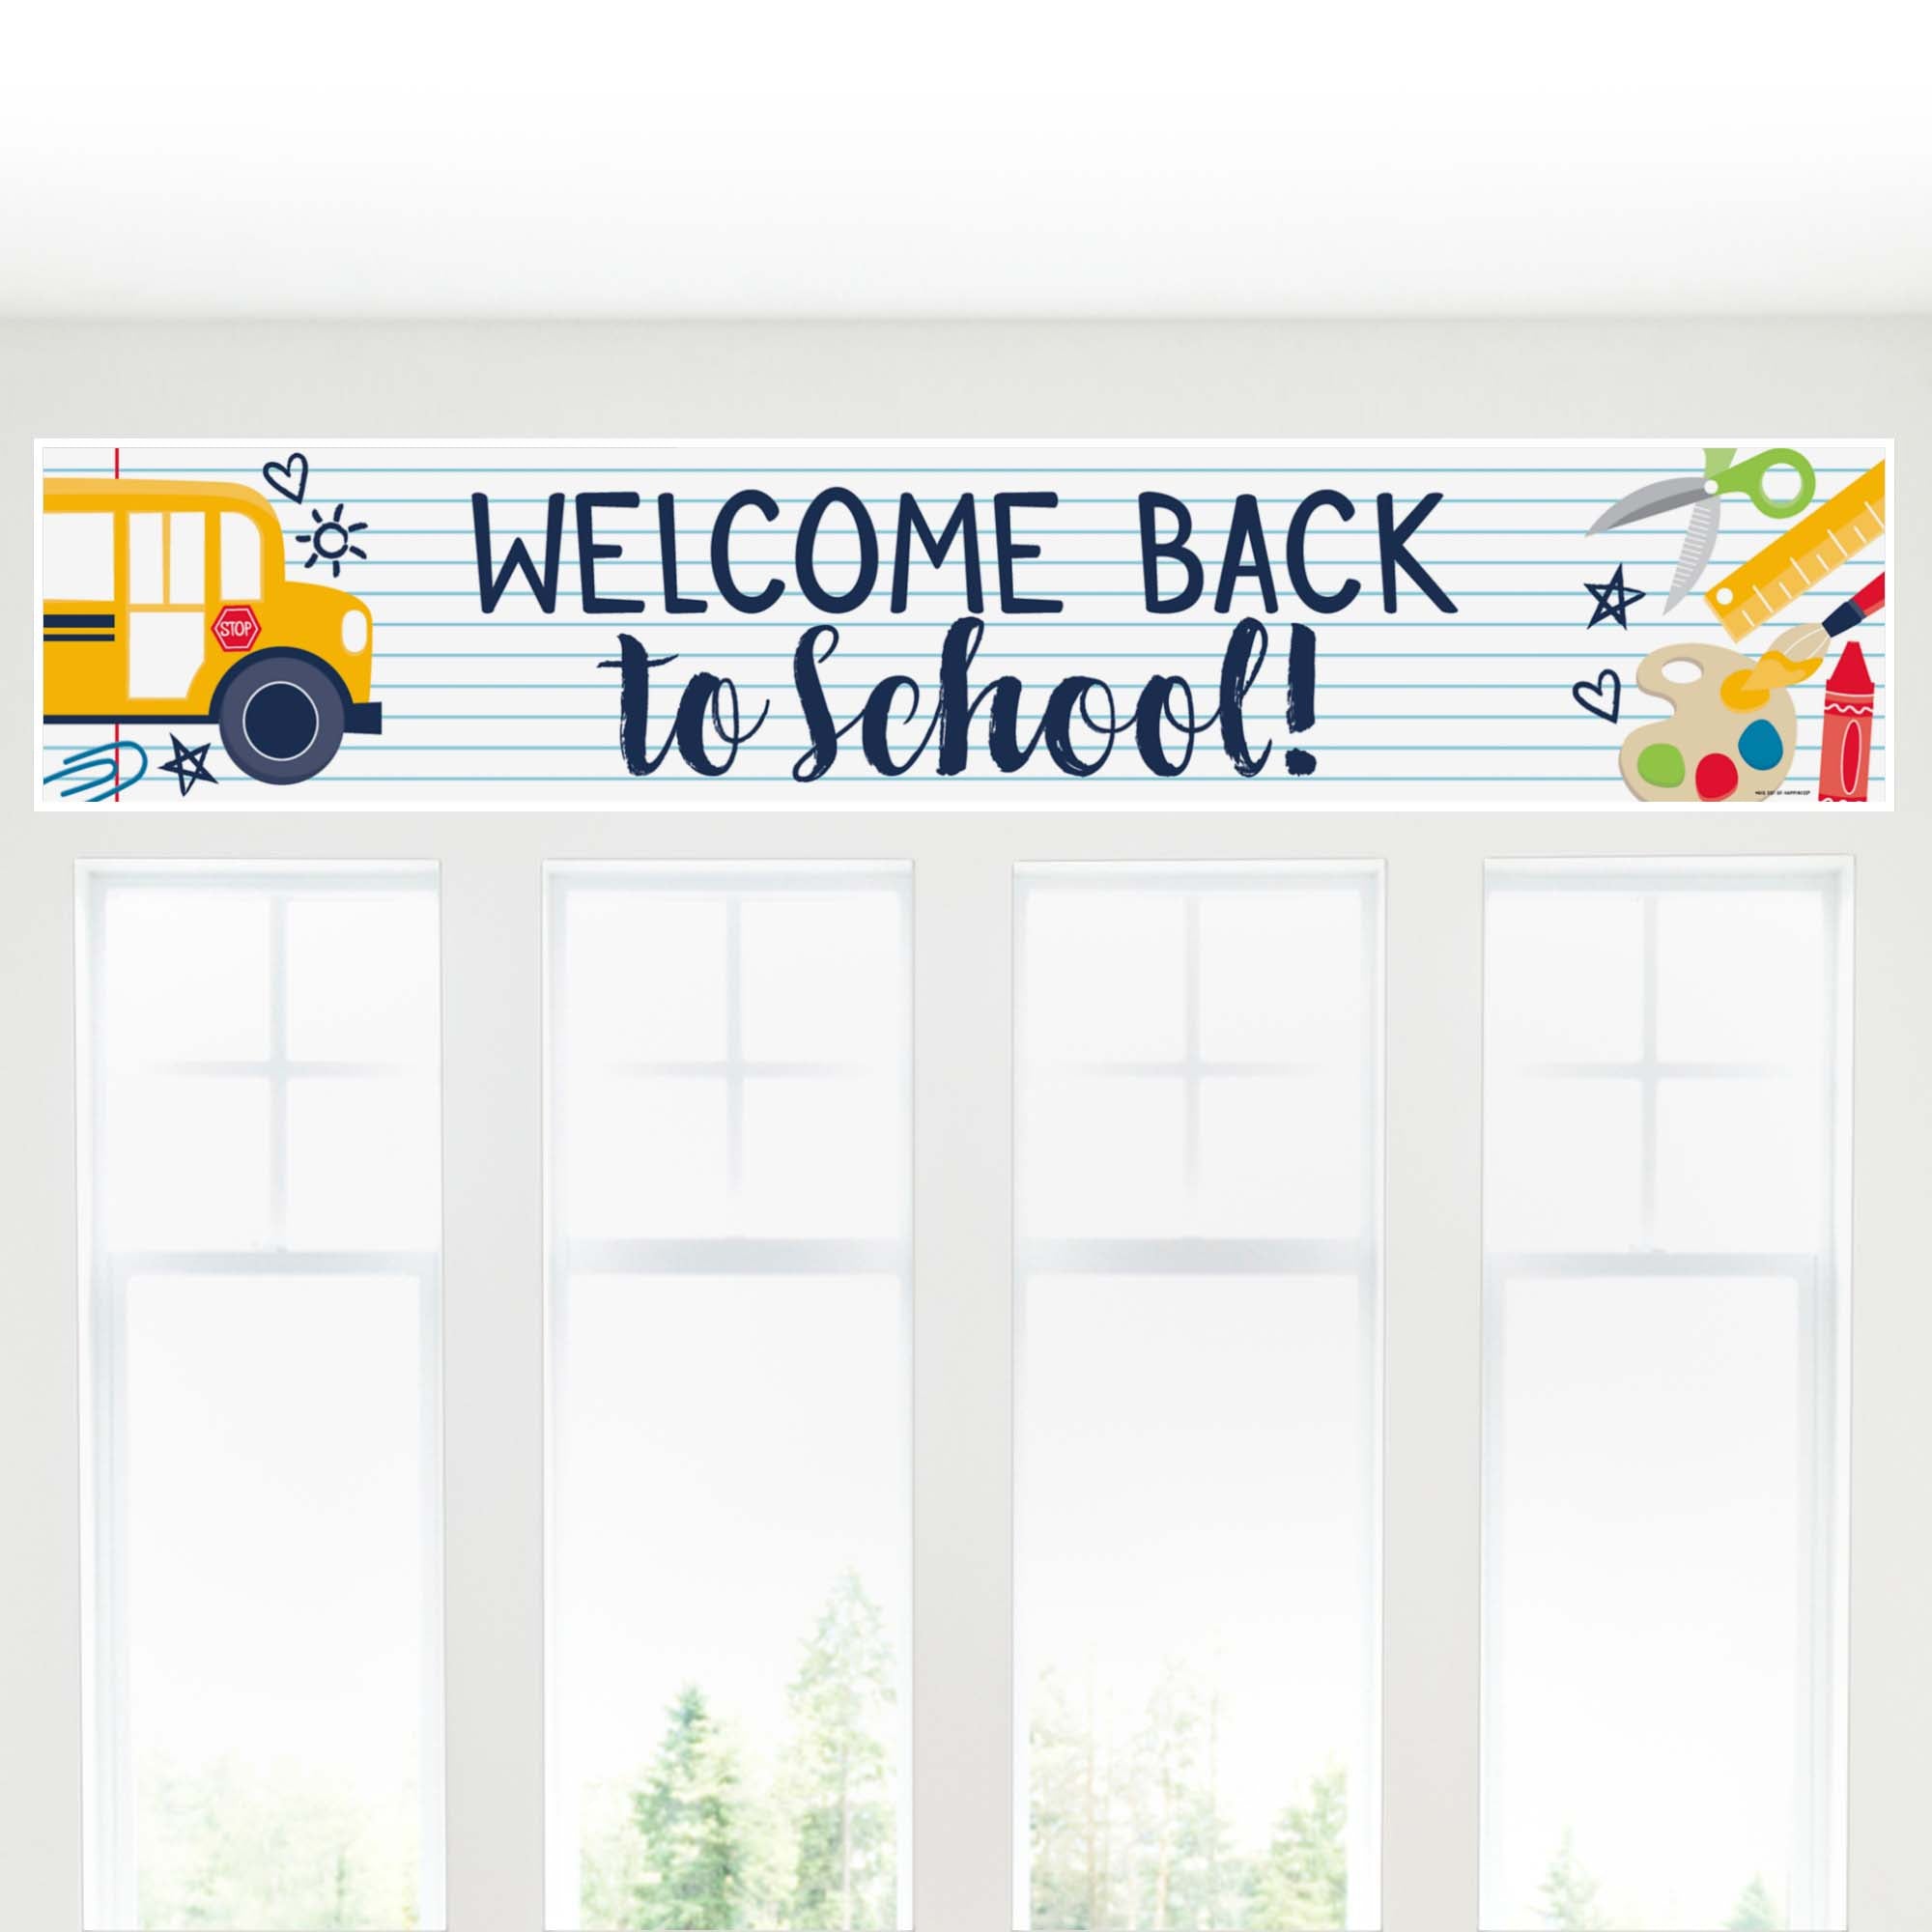 Back to School - First Day of School Classroom Banner ...